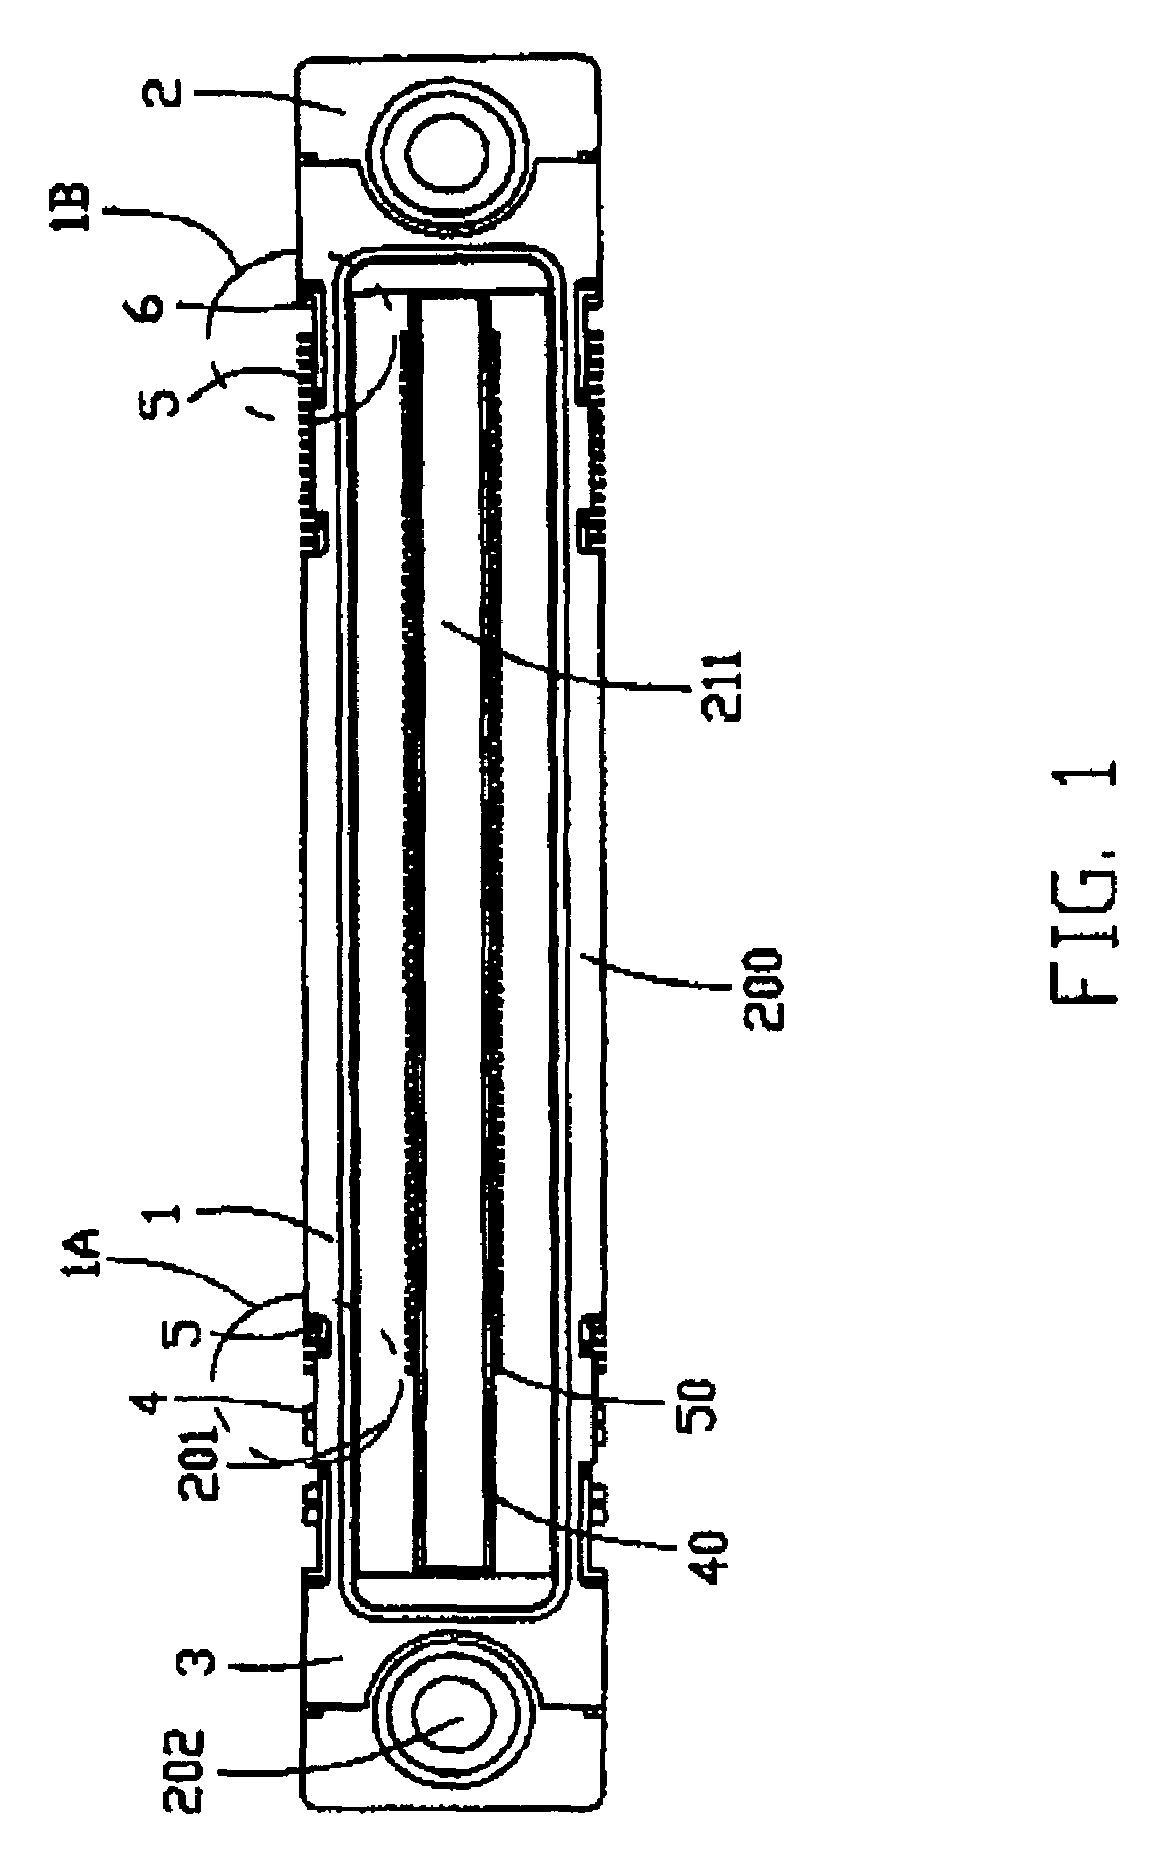 Board-mounted electrical connector with balanced solder attachment to a circuit board